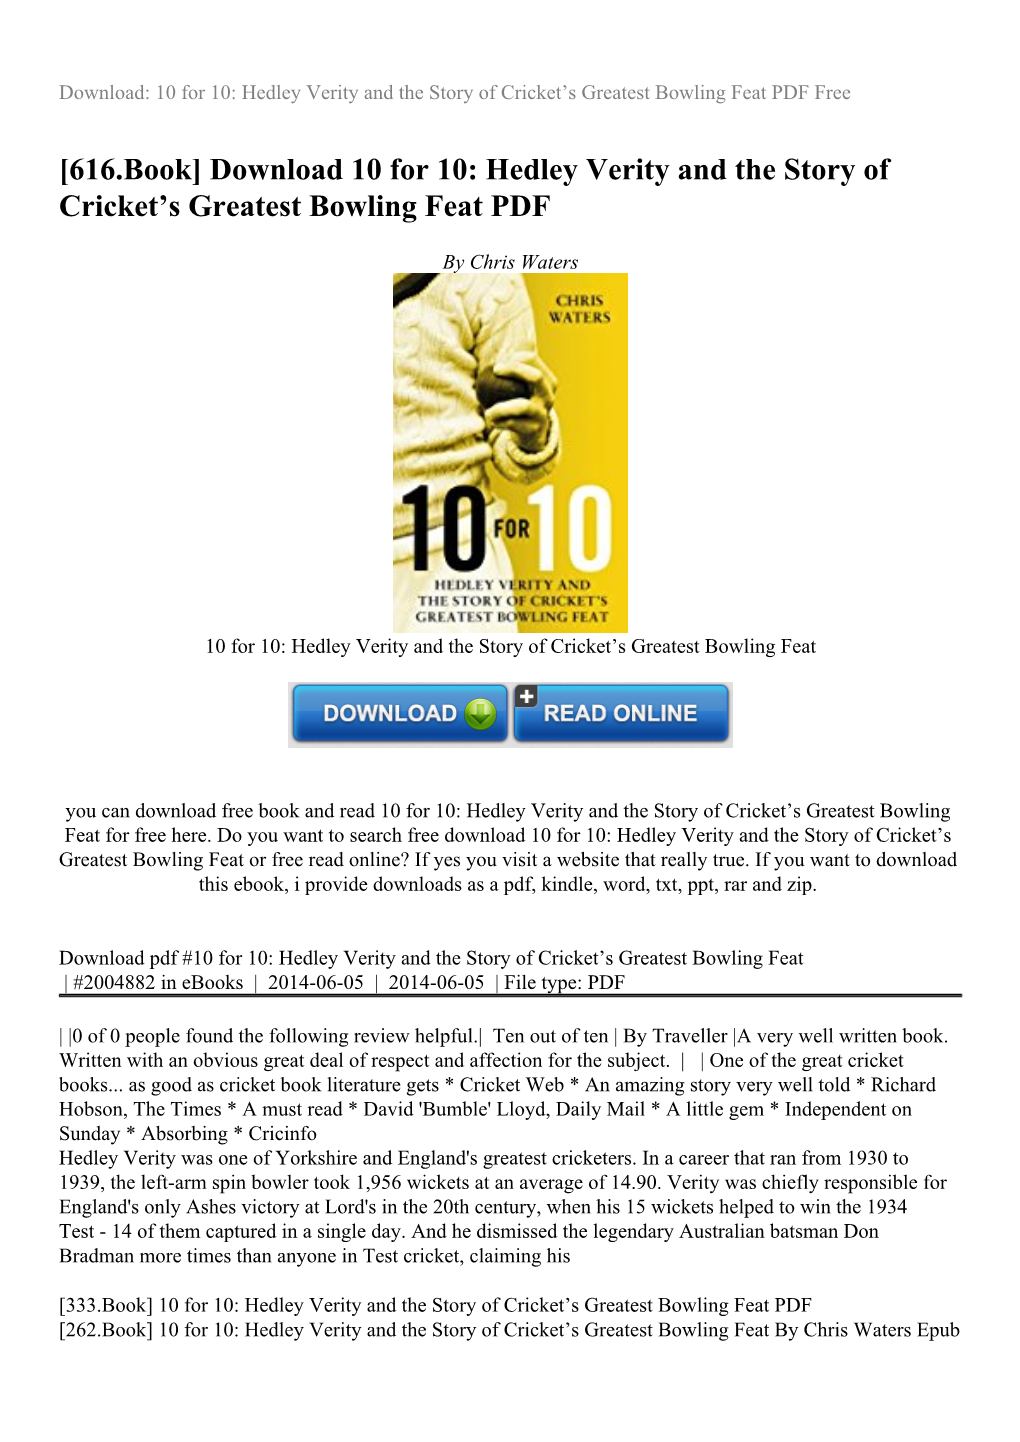 Download 10 for 10: Hedley Verity and the Story of Cricket™S Greatest Bowling Feat